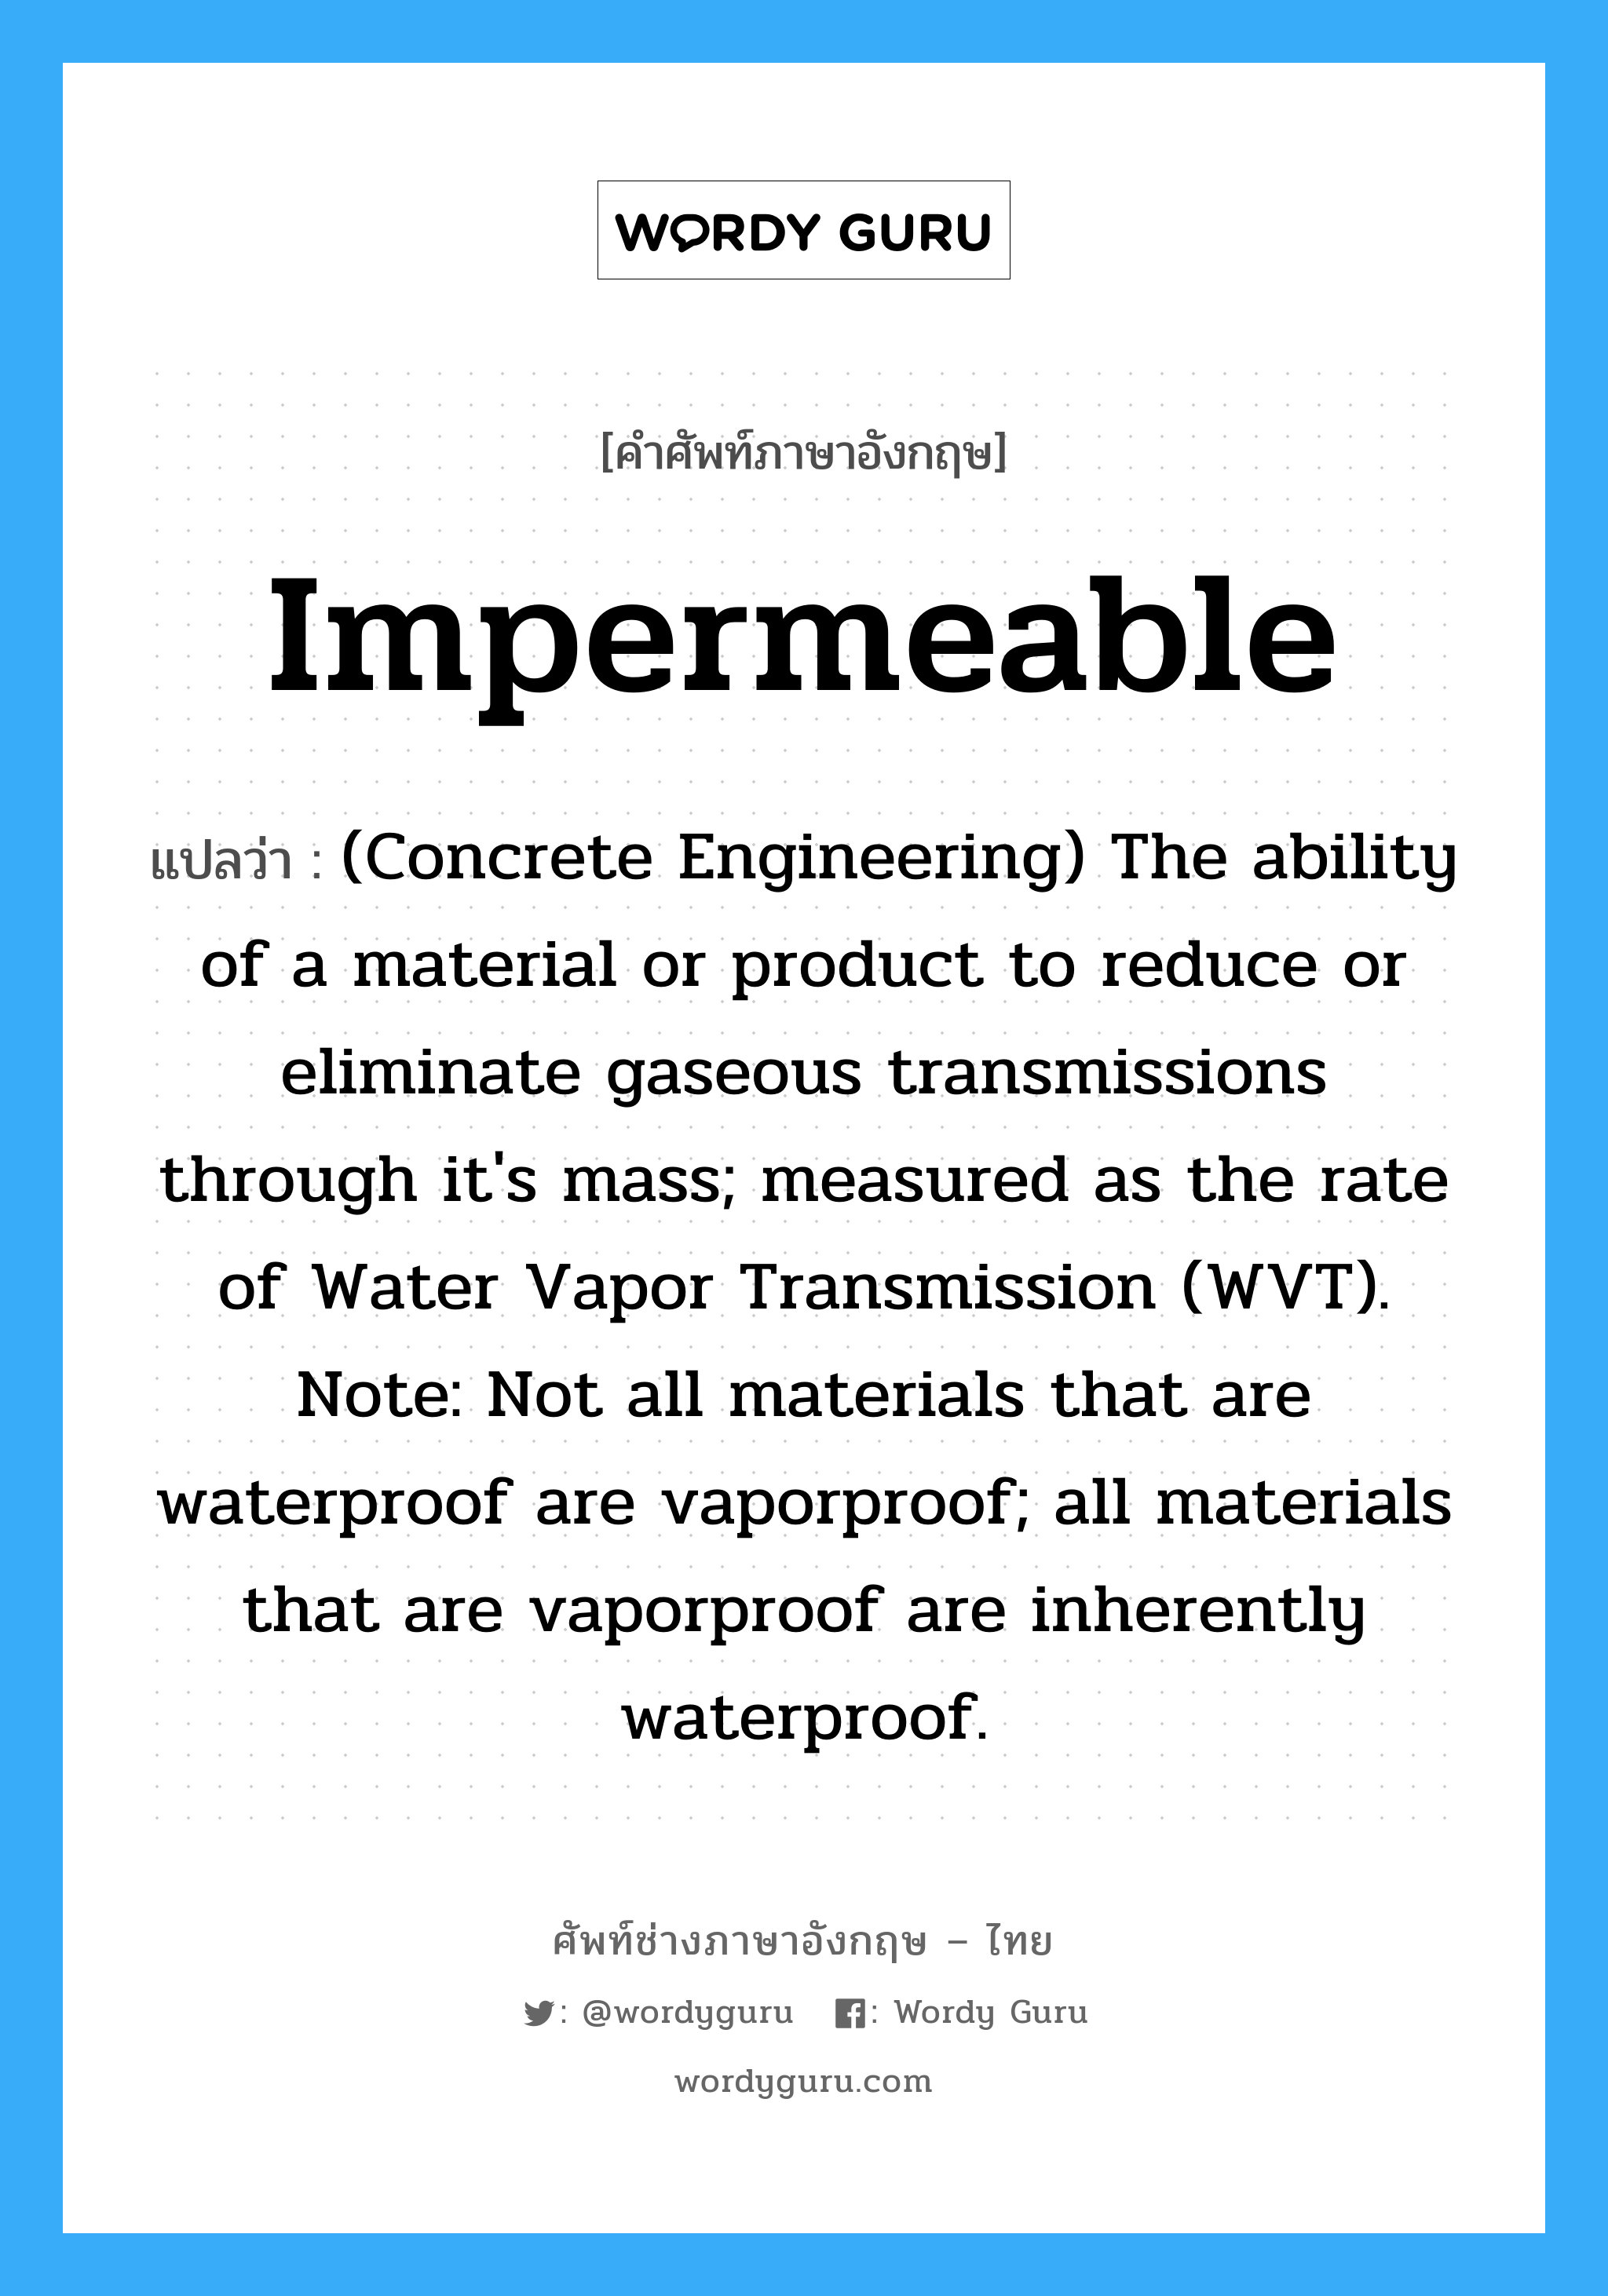 Impermeable แปลว่า?, คำศัพท์ช่างภาษาอังกฤษ - ไทย Impermeable คำศัพท์ภาษาอังกฤษ Impermeable แปลว่า (Concrete Engineering) The ability of a material or product to reduce or eliminate gaseous transmissions through it's mass; measured as the rate of Water Vapor Transmission (WVT). Note: Not all materials that are waterproof are vaporproof; all materials that are vaporproof are inherently waterproof.